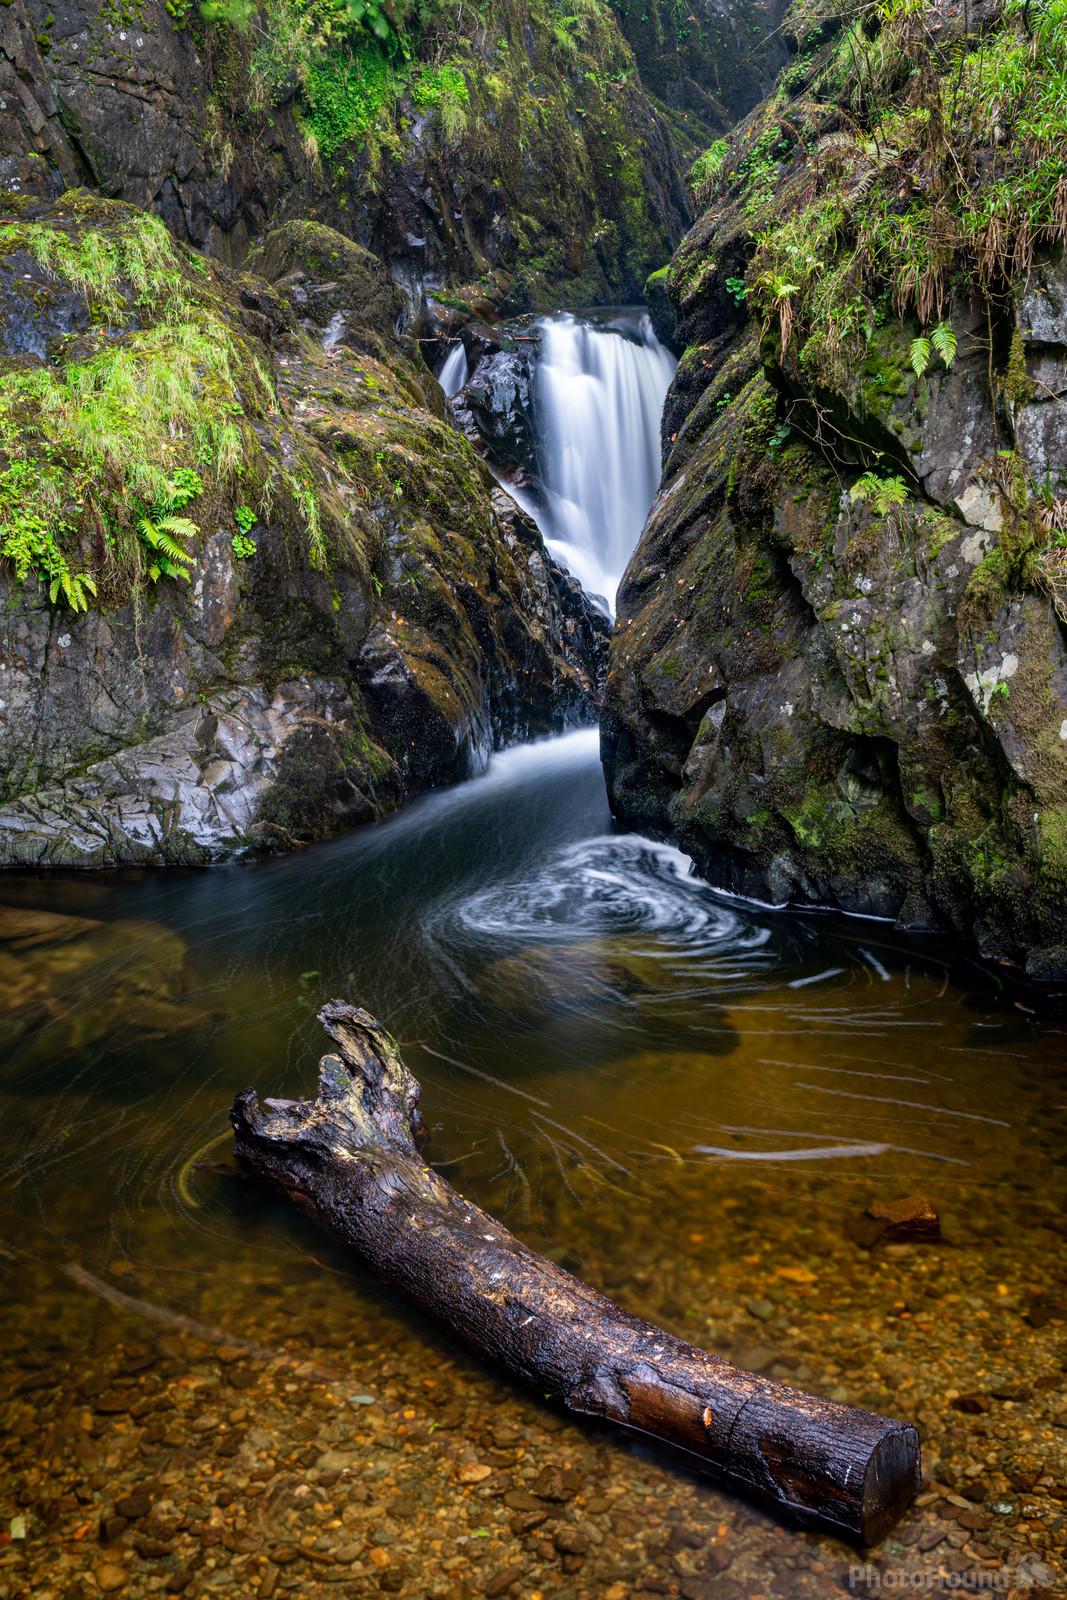 Image of Aira Force and High Forces, Lake District by Richard Lizzimore